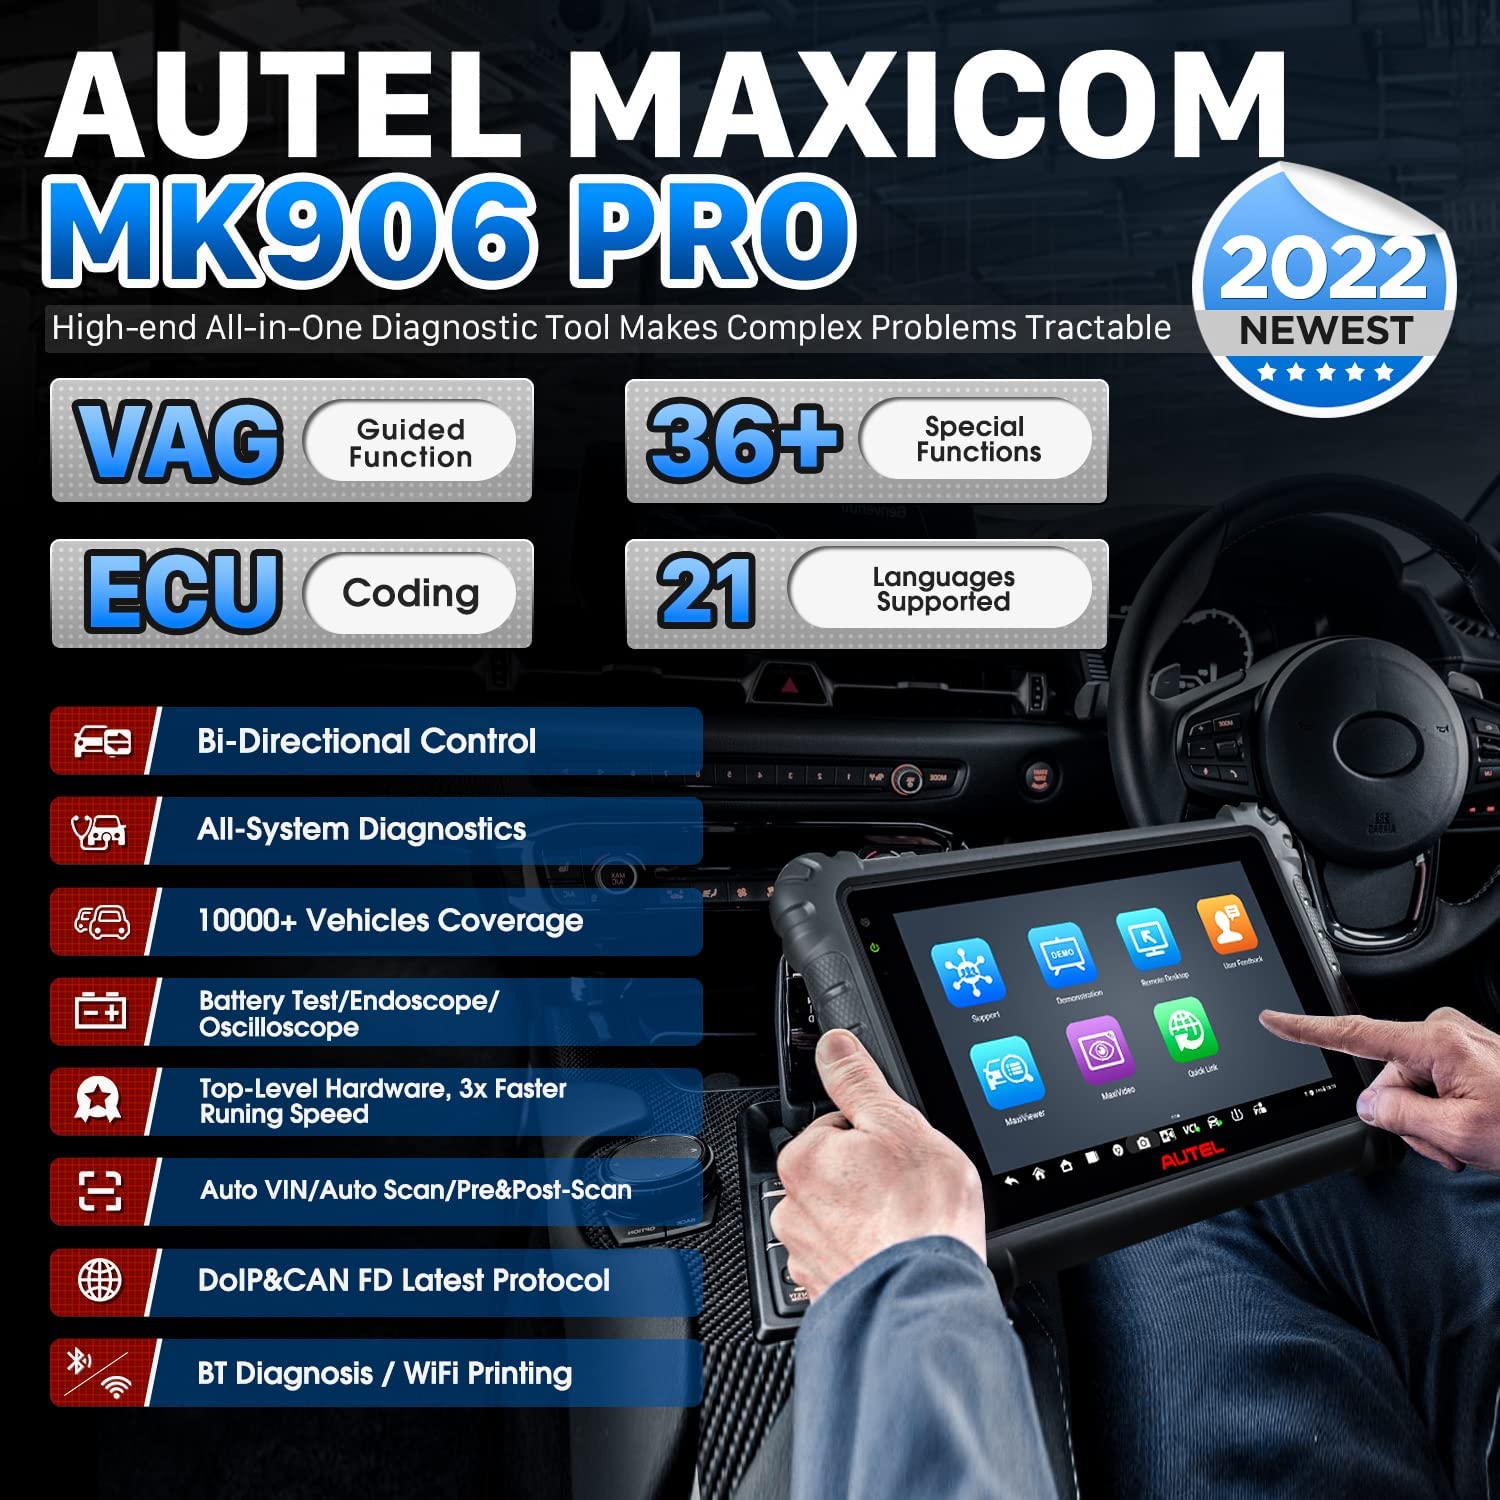 Autel Maxicom MK906Pro  is high-end All -in-one diagnostic tool